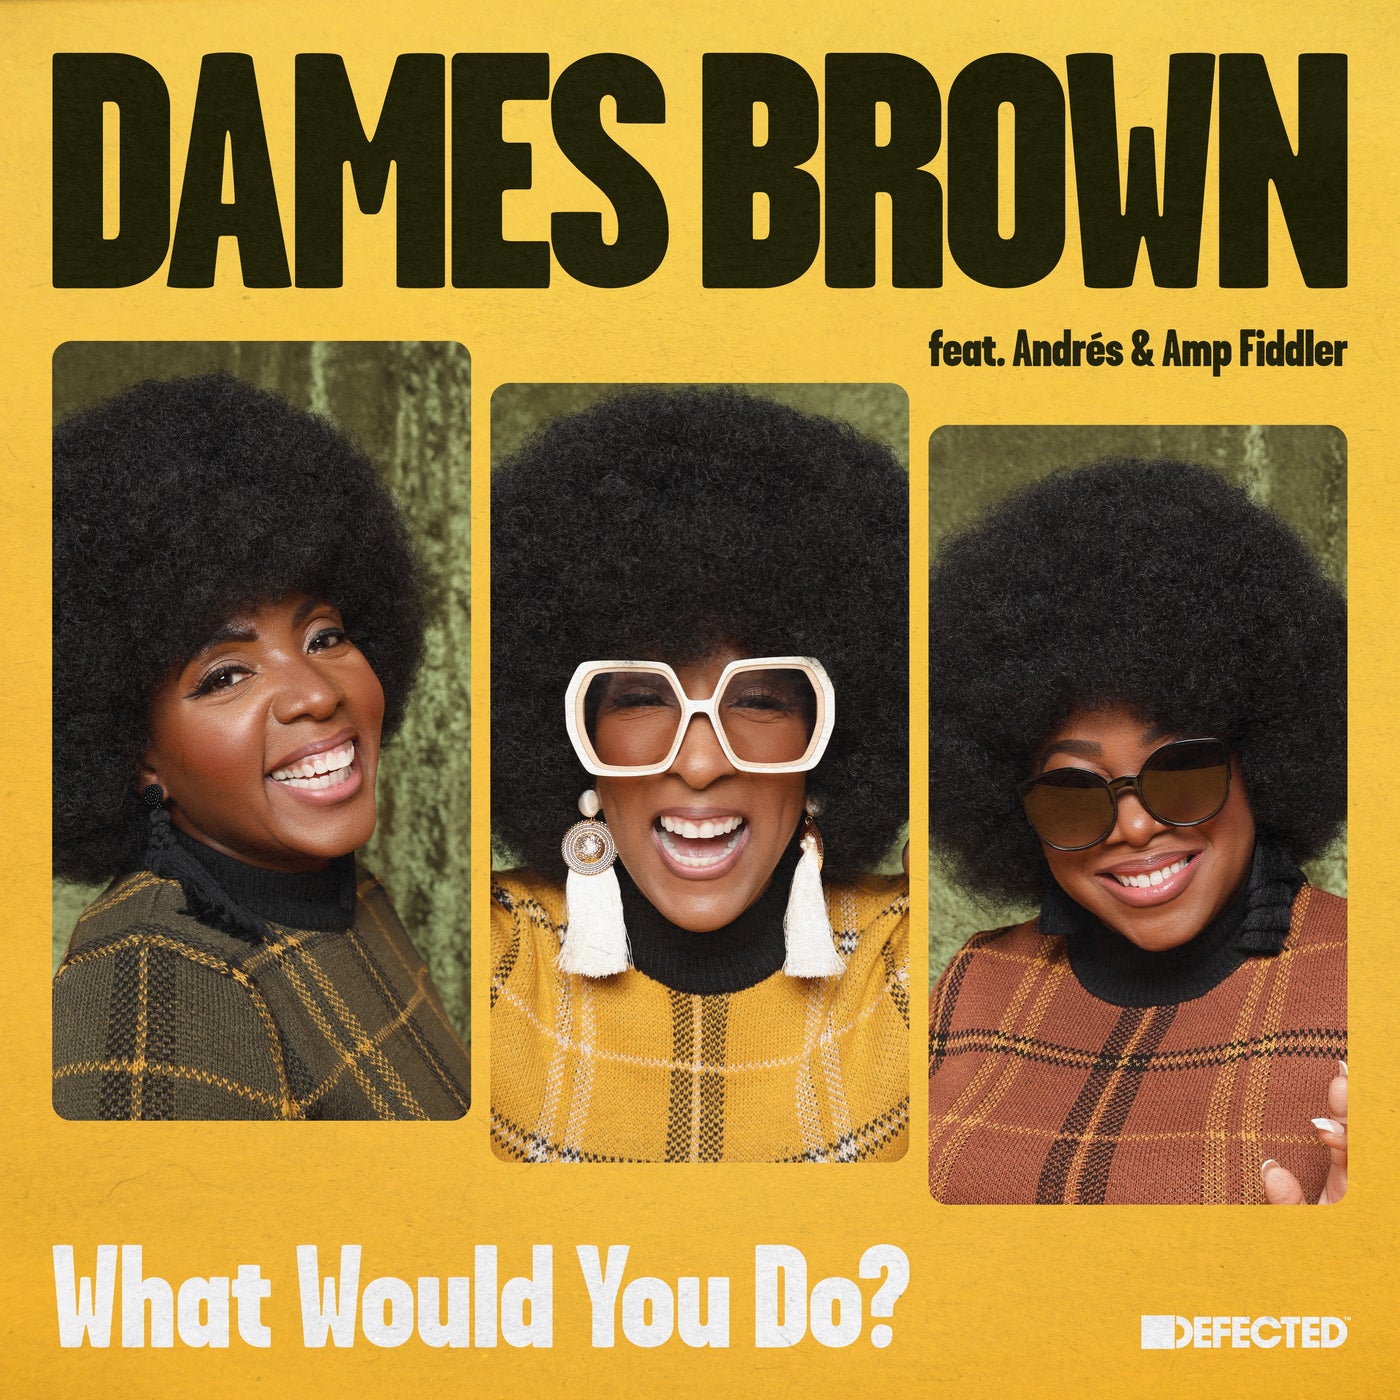 image cover: AMP Fiddler, Andrés, Dames Brown - What Would You Do? - 12" Mix / DFTD635D2